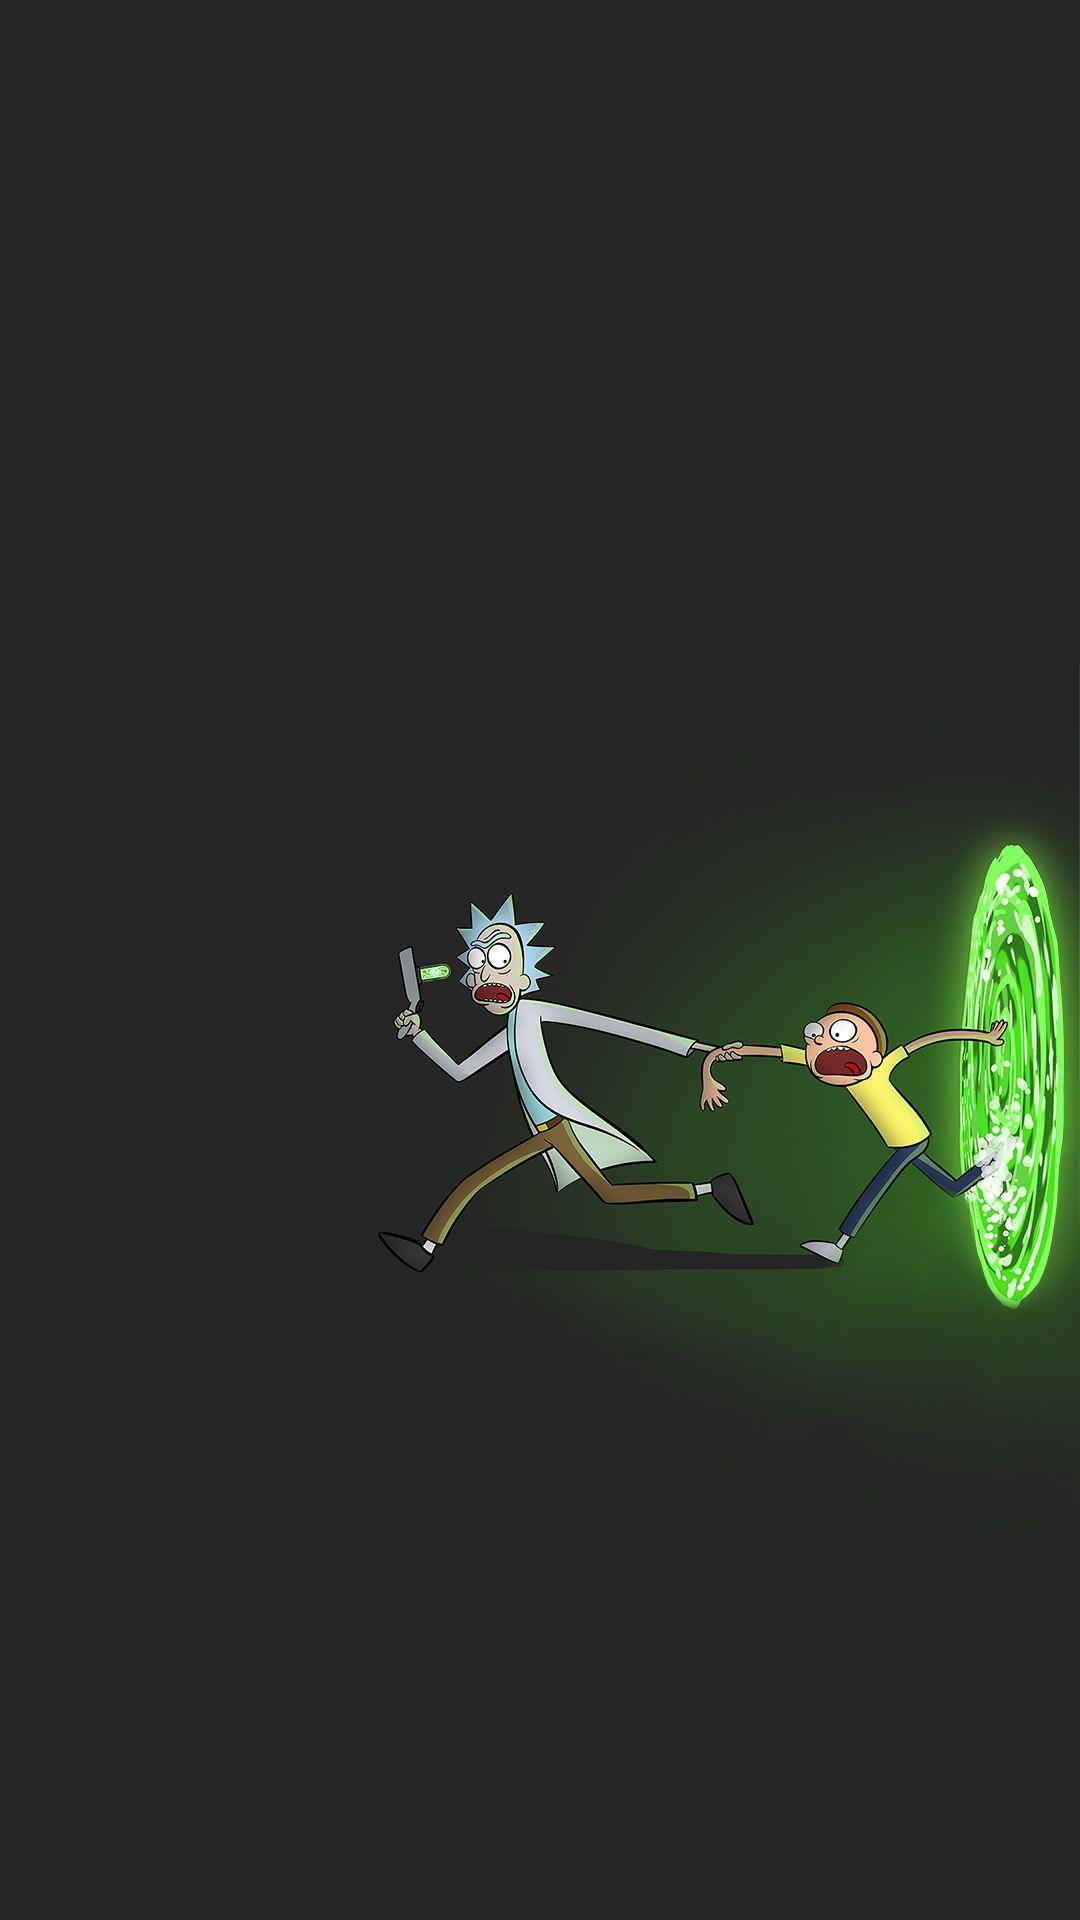 Featured image of post Rick And Morty Wallpaper Ipad Pro Ultra hd 4k rick and morty wallpapers for desktop pc laptop iphone android phone smartphone imac macbook tablet mobile device